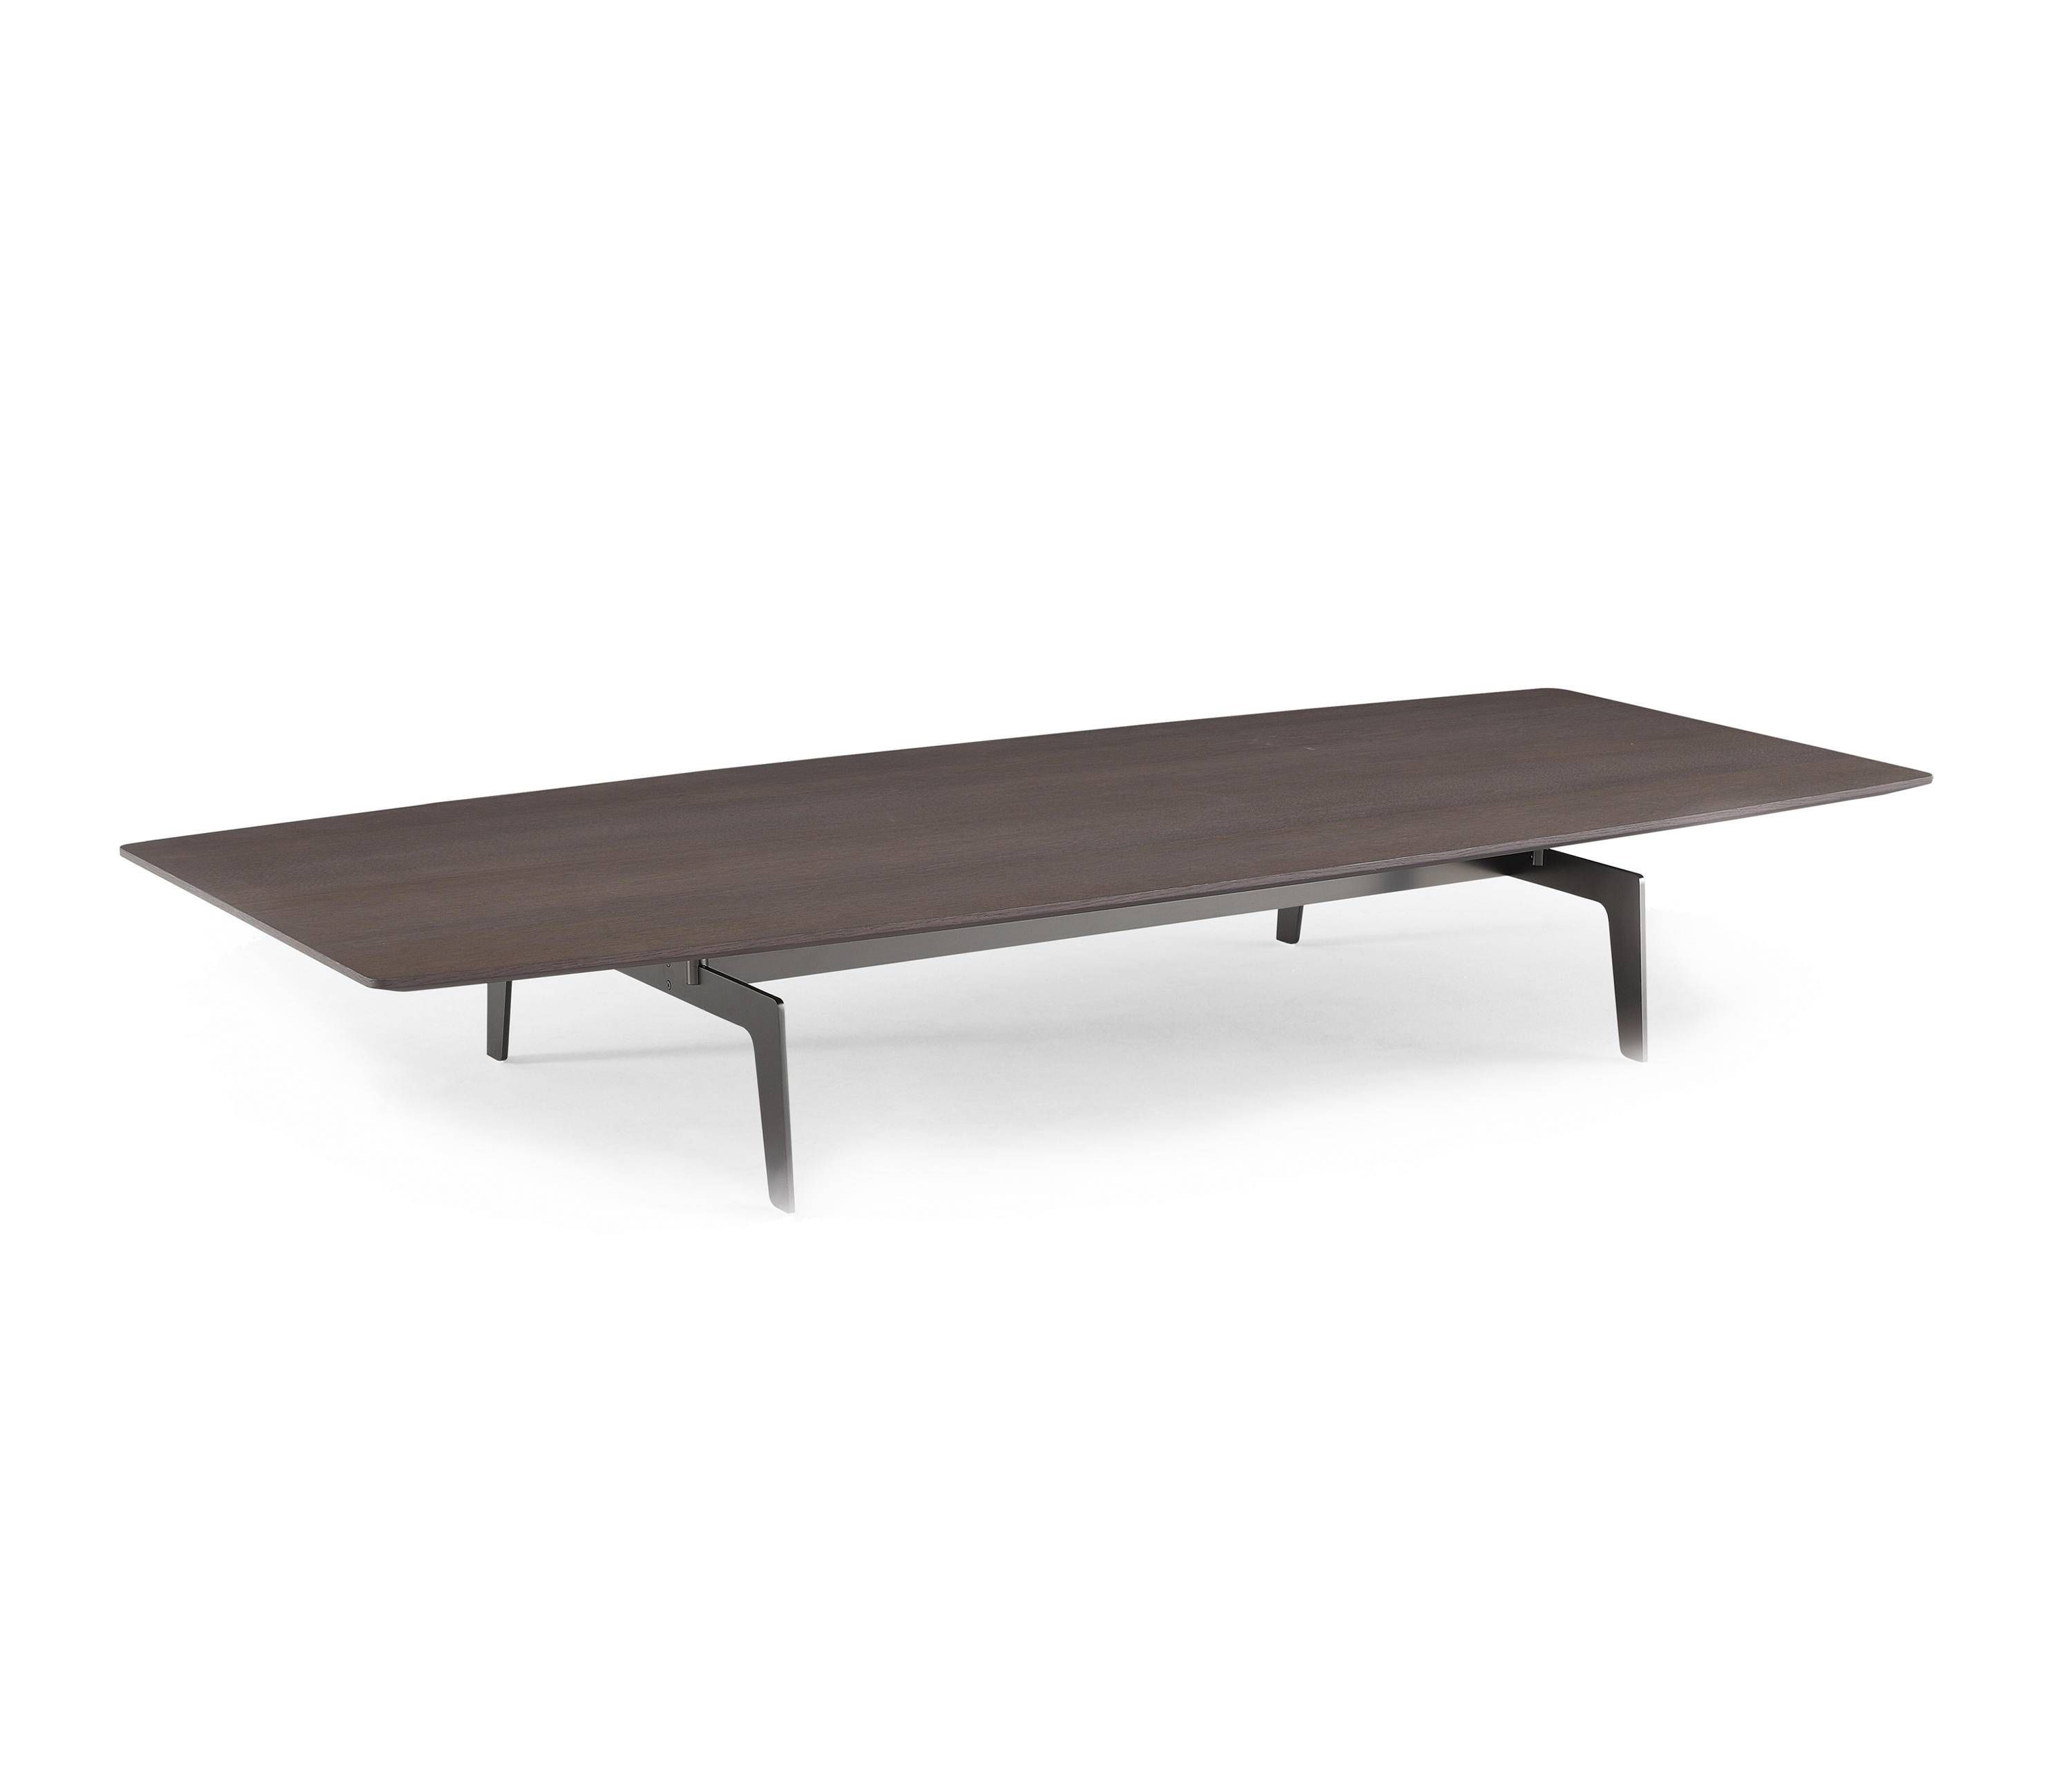 Tribeca Coffee Table – Coffee Tables From Poliform | Architonic Inside Tribeca Coffee Tables (View 5 of 30)